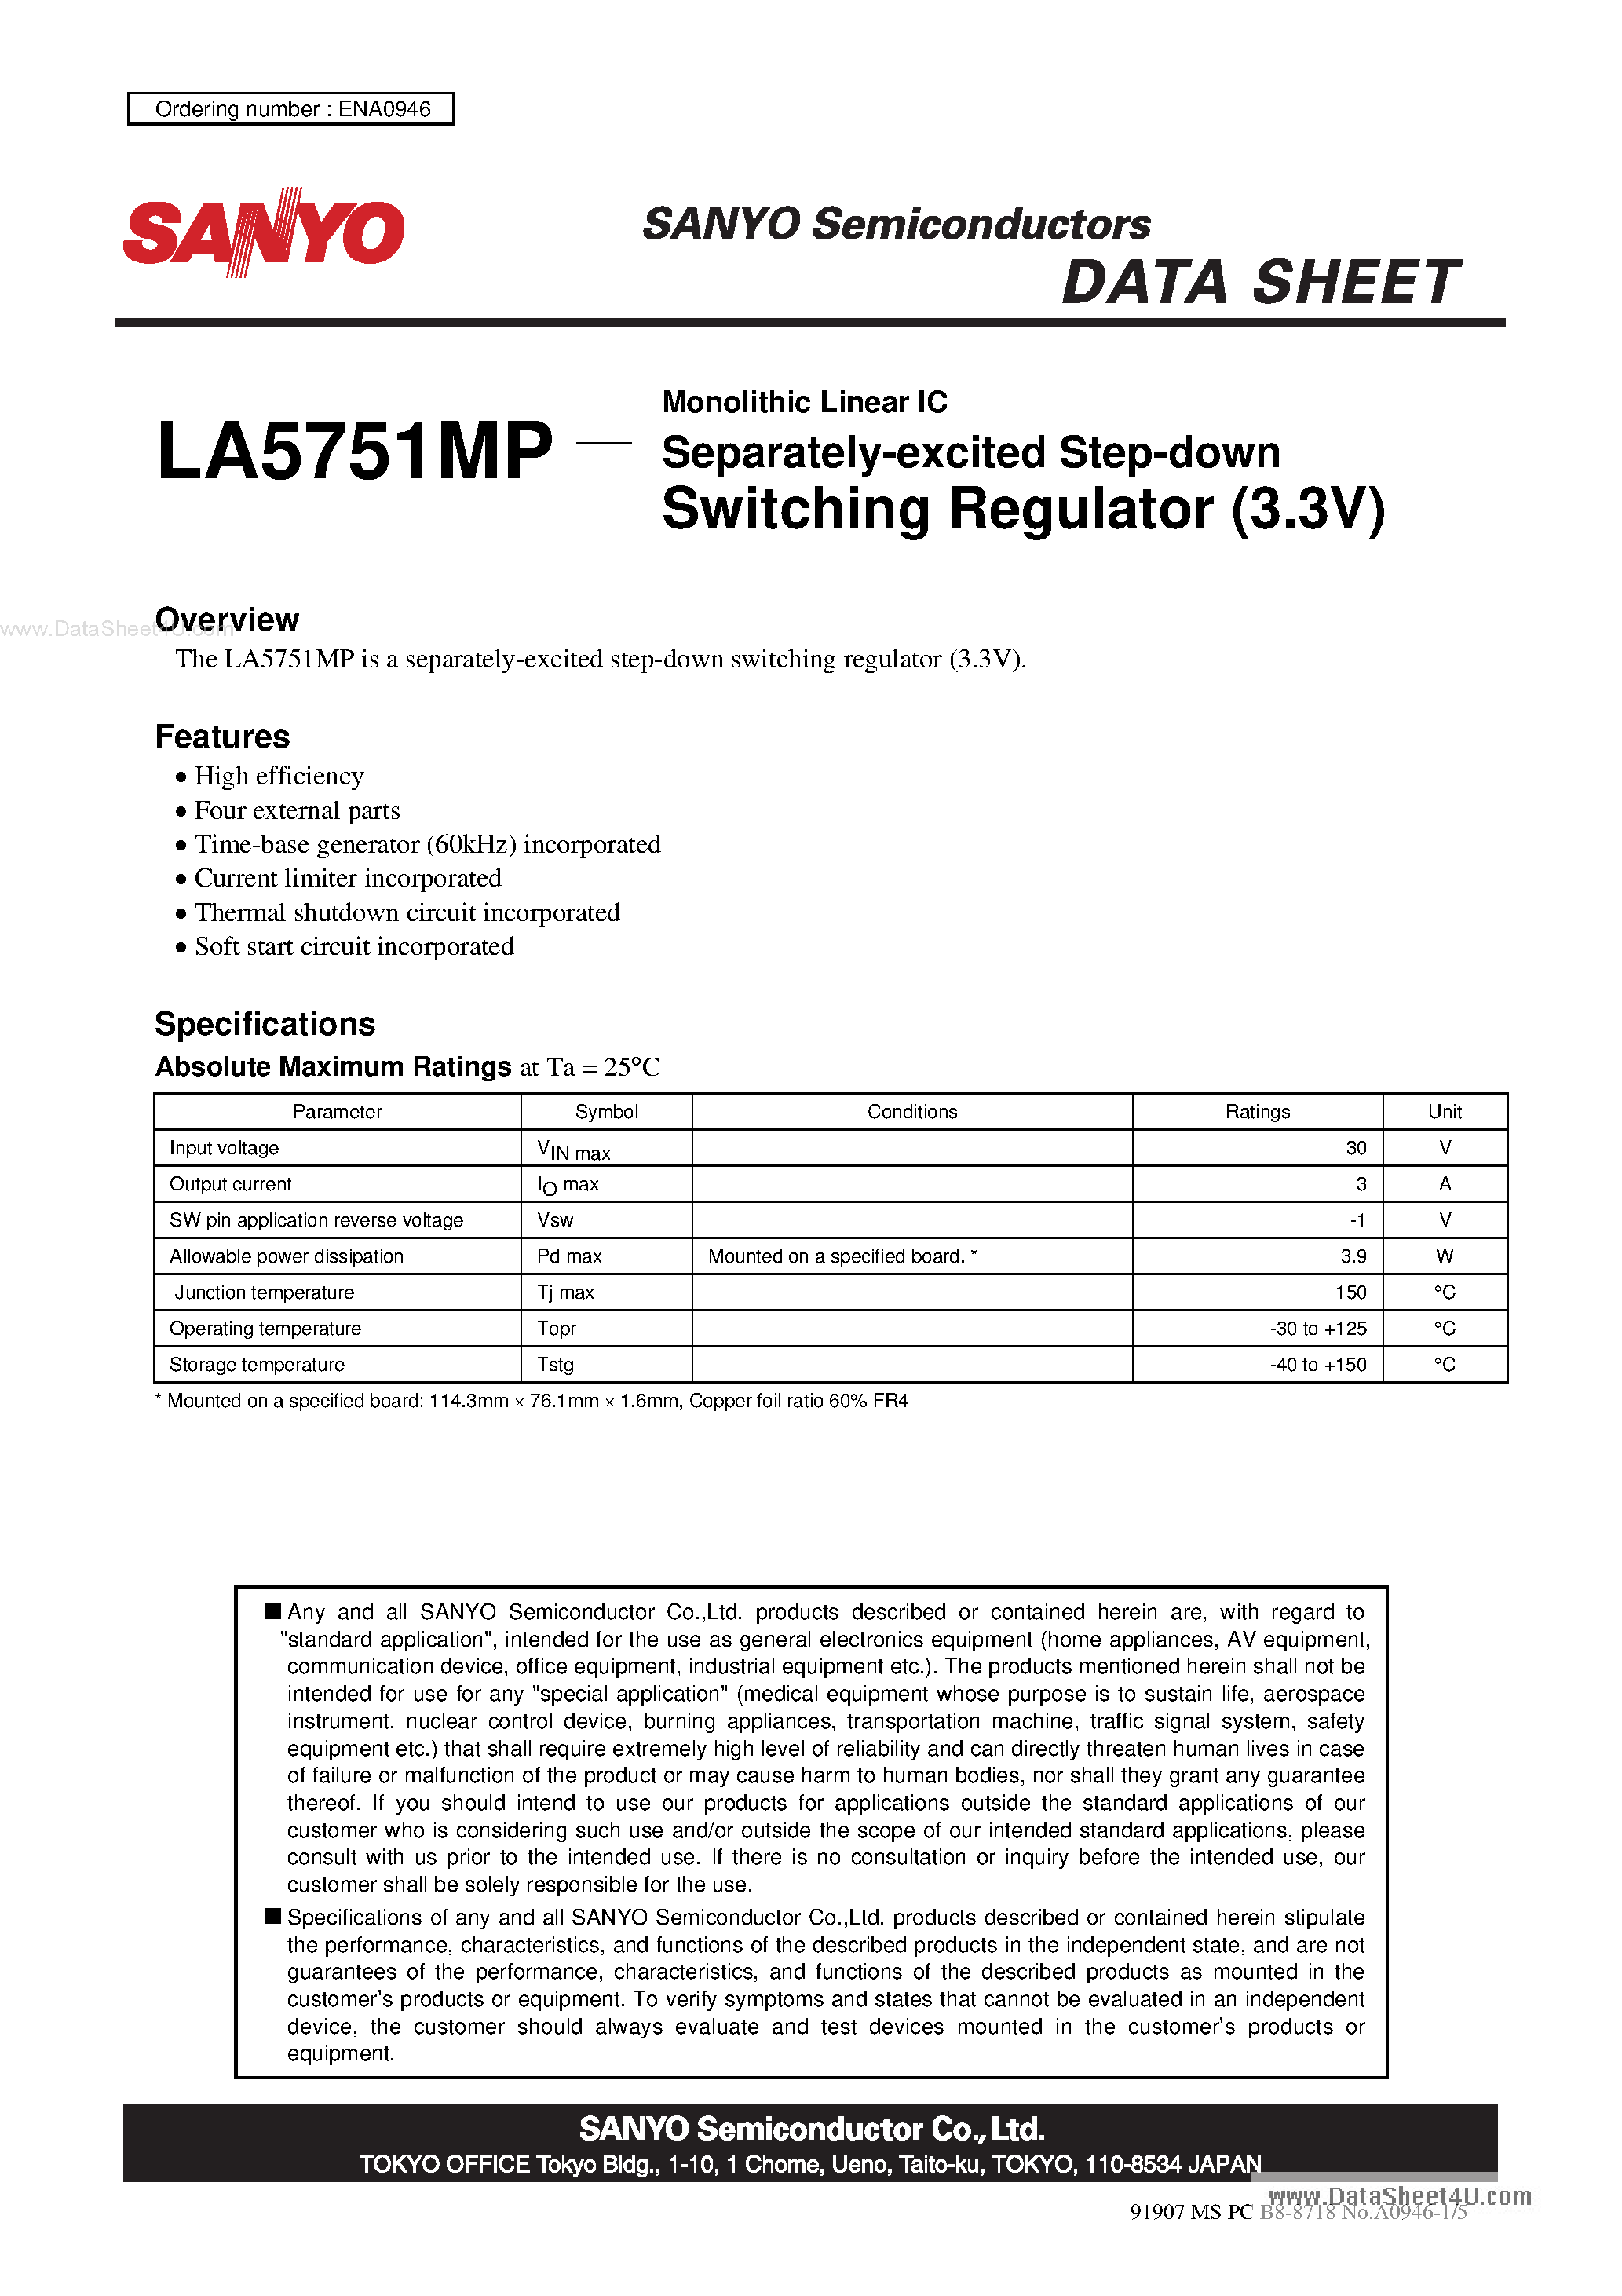 Даташит LA5751MP-Monolithic Linear IC Separately-Excited Step-Down Switching Regulator страница 1